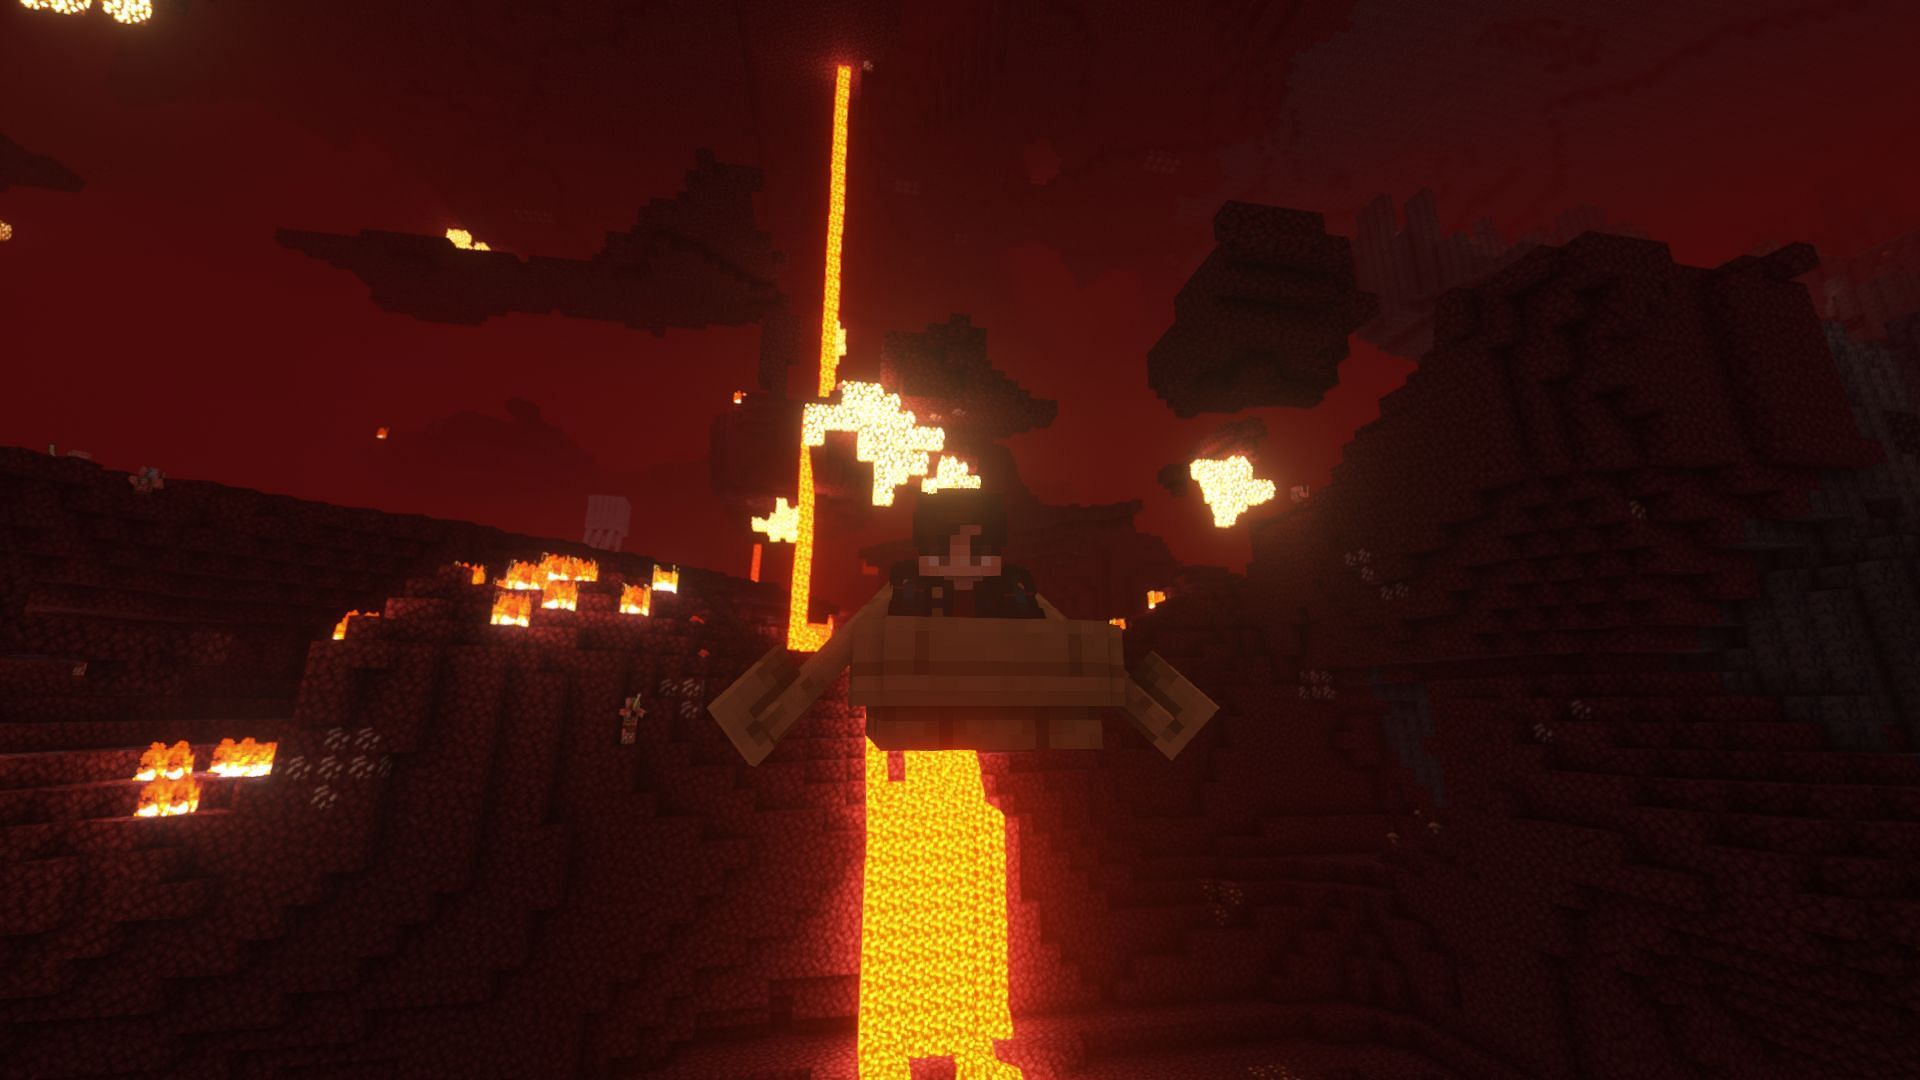 The player in a boat falling into the Nether dimension (Image via Mojang)